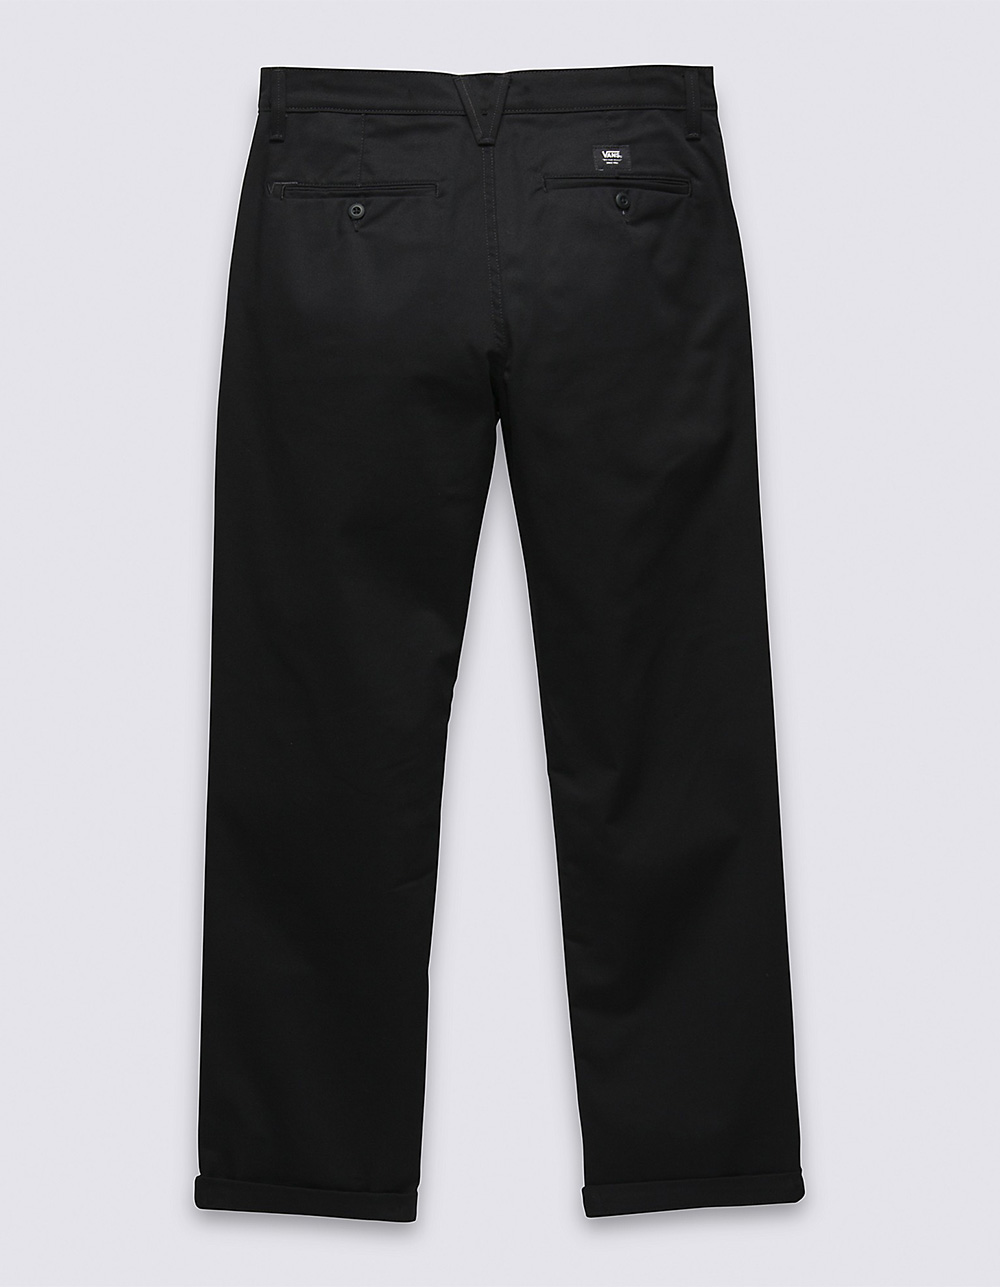 VANS Authentic Chino Relaxed Mens Pants - BLACK | Tillys